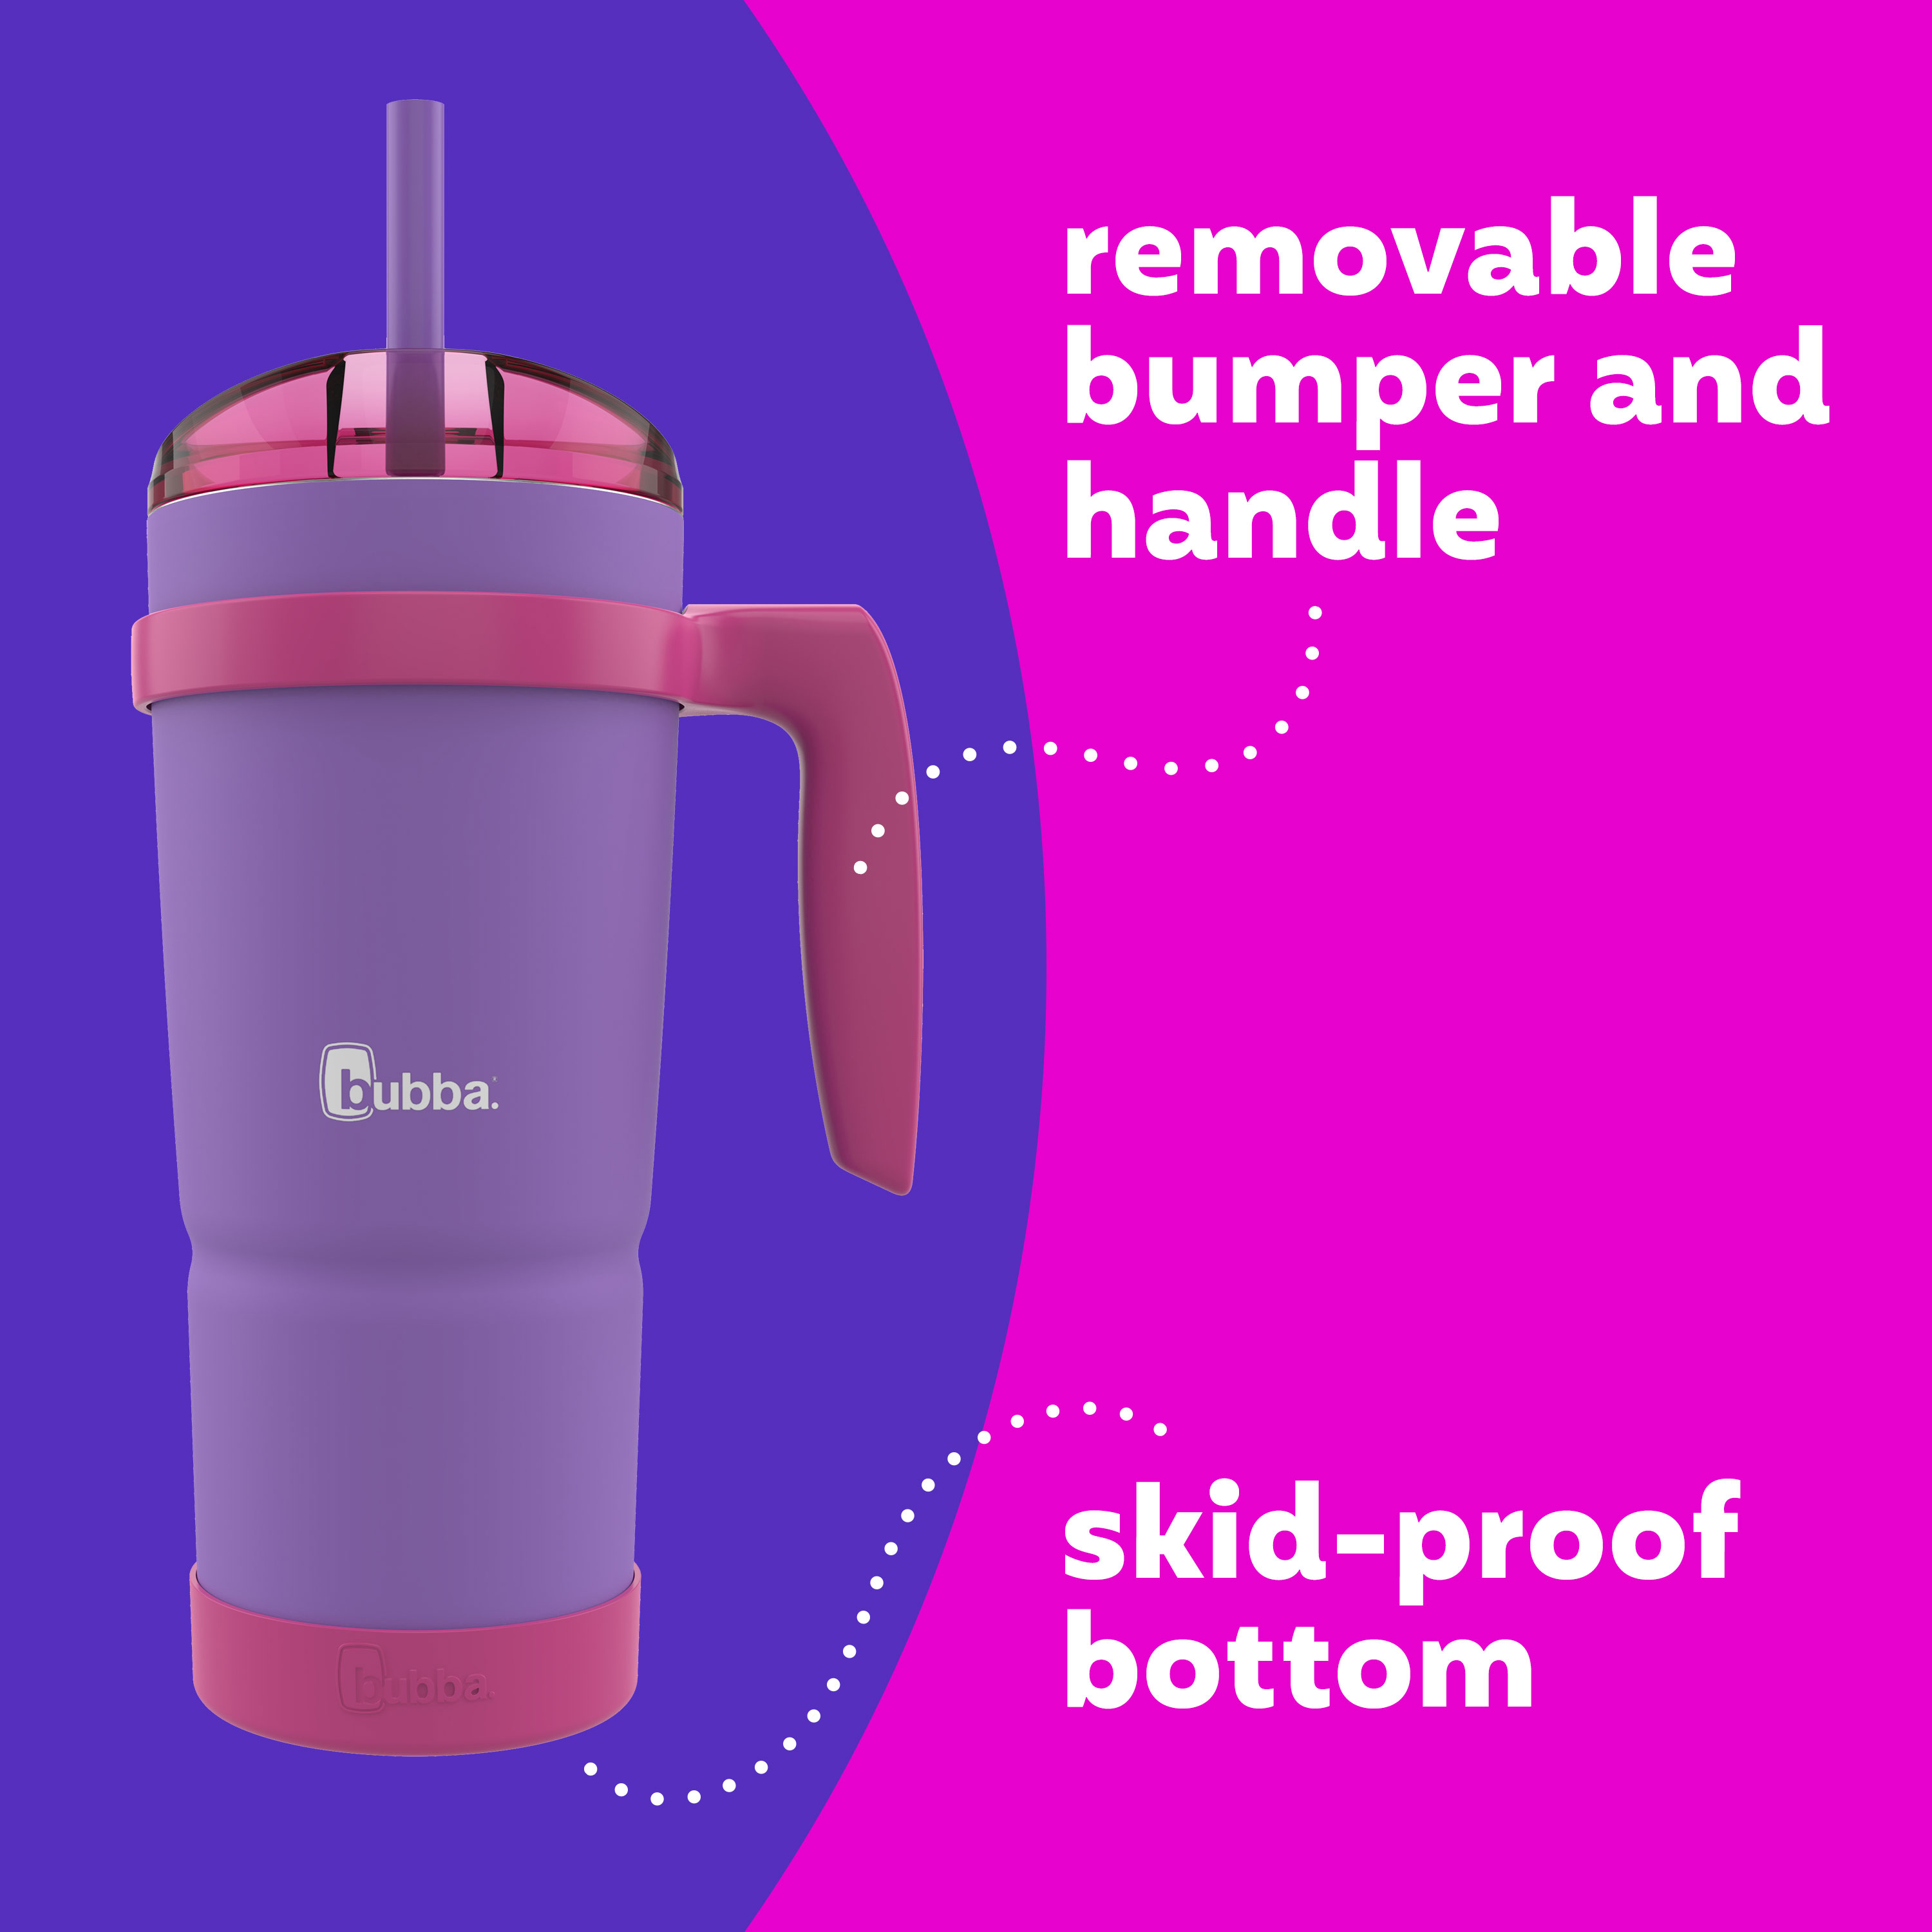 bubba Envy Stainless Steel Tumbler with Removeable Handle, Bumper, Straw Rubberized in Purple 32 oz. - image 4 of 6